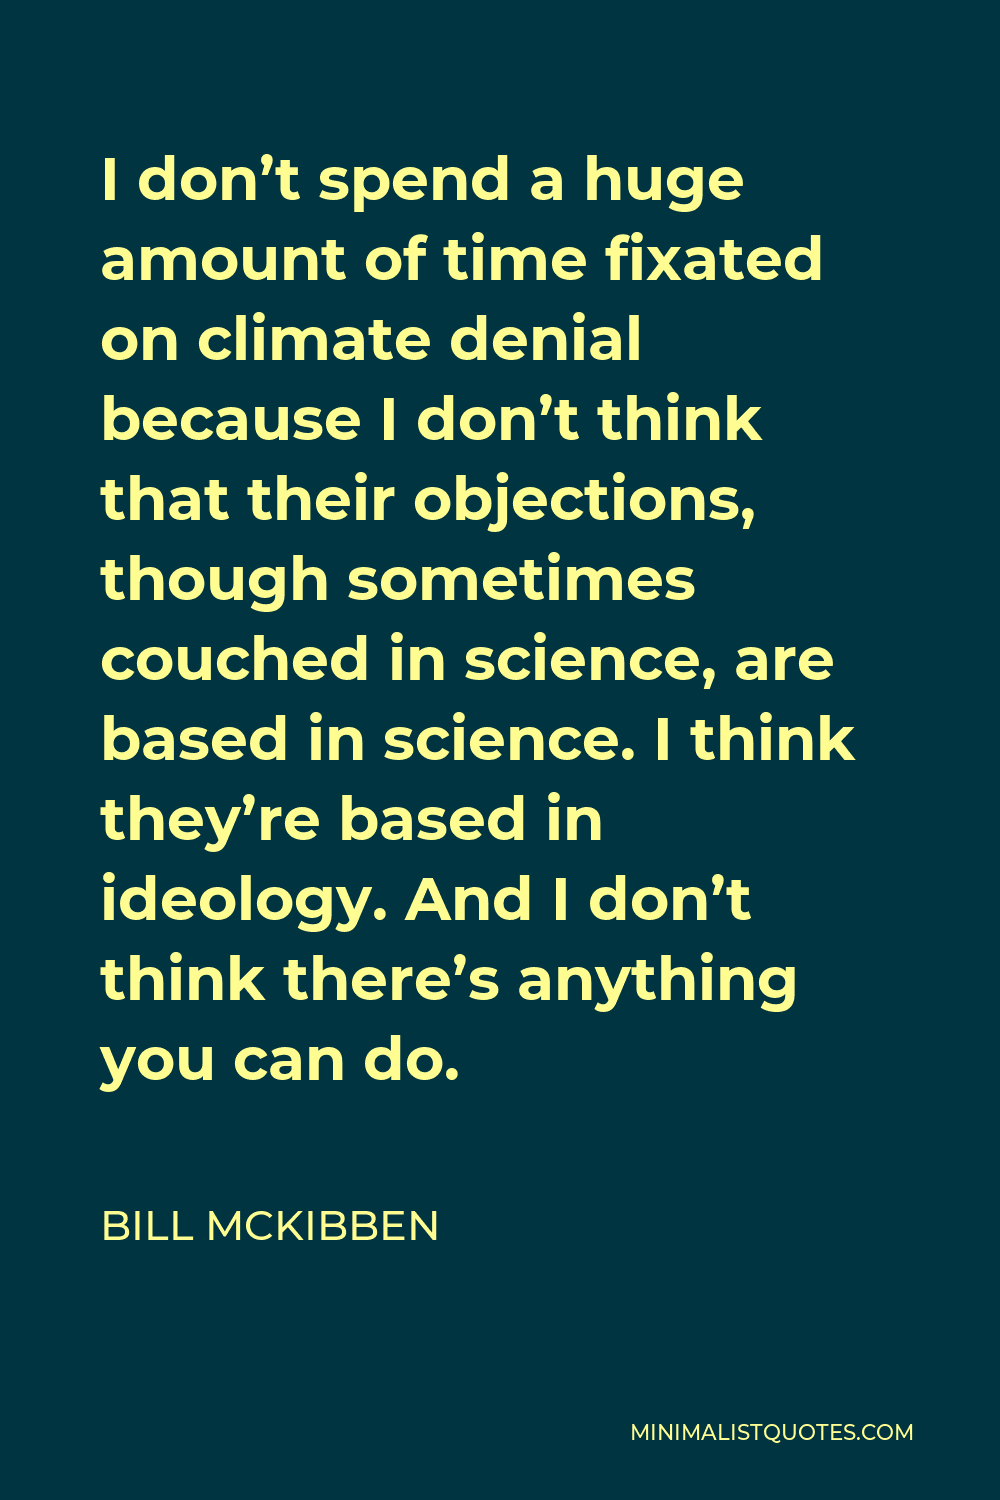 Bill McKibben Quote - I don’t spend a huge amount of time fixated on climate denial because I don’t think that their objections, though sometimes couched in science, are based in science. I think they’re based in ideology. And I don’t think there’s anything you can do.